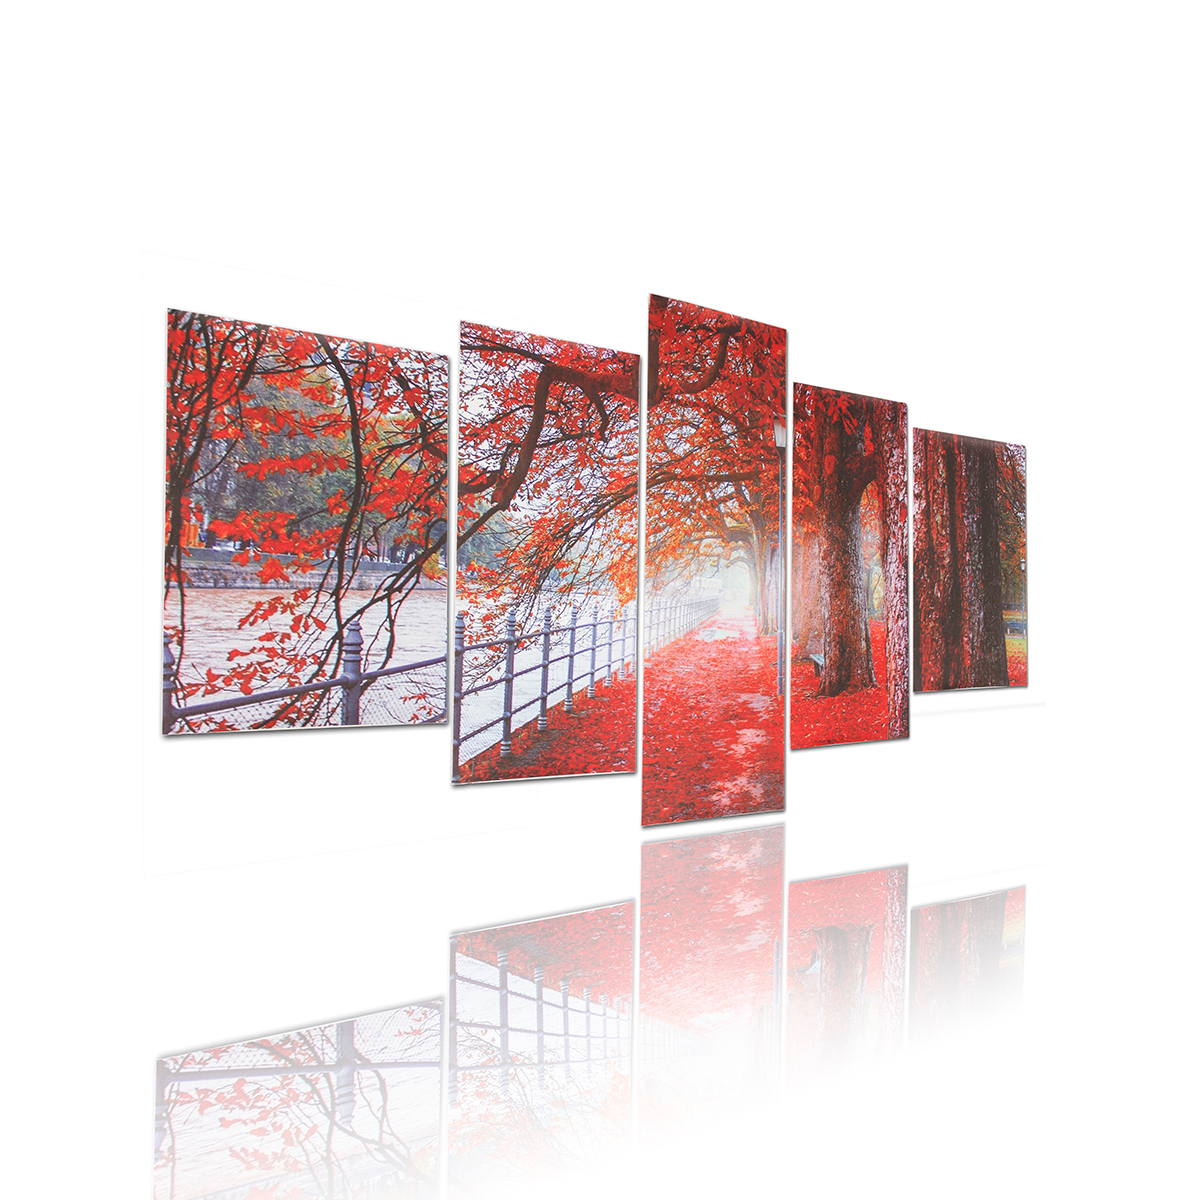 5Pcs-Red-Falling-Leaves-Canvas-Painting-Autumn-Tree-Wall-Decorative-Print-Art-Pictures-Unframed-Wall-1809936-6